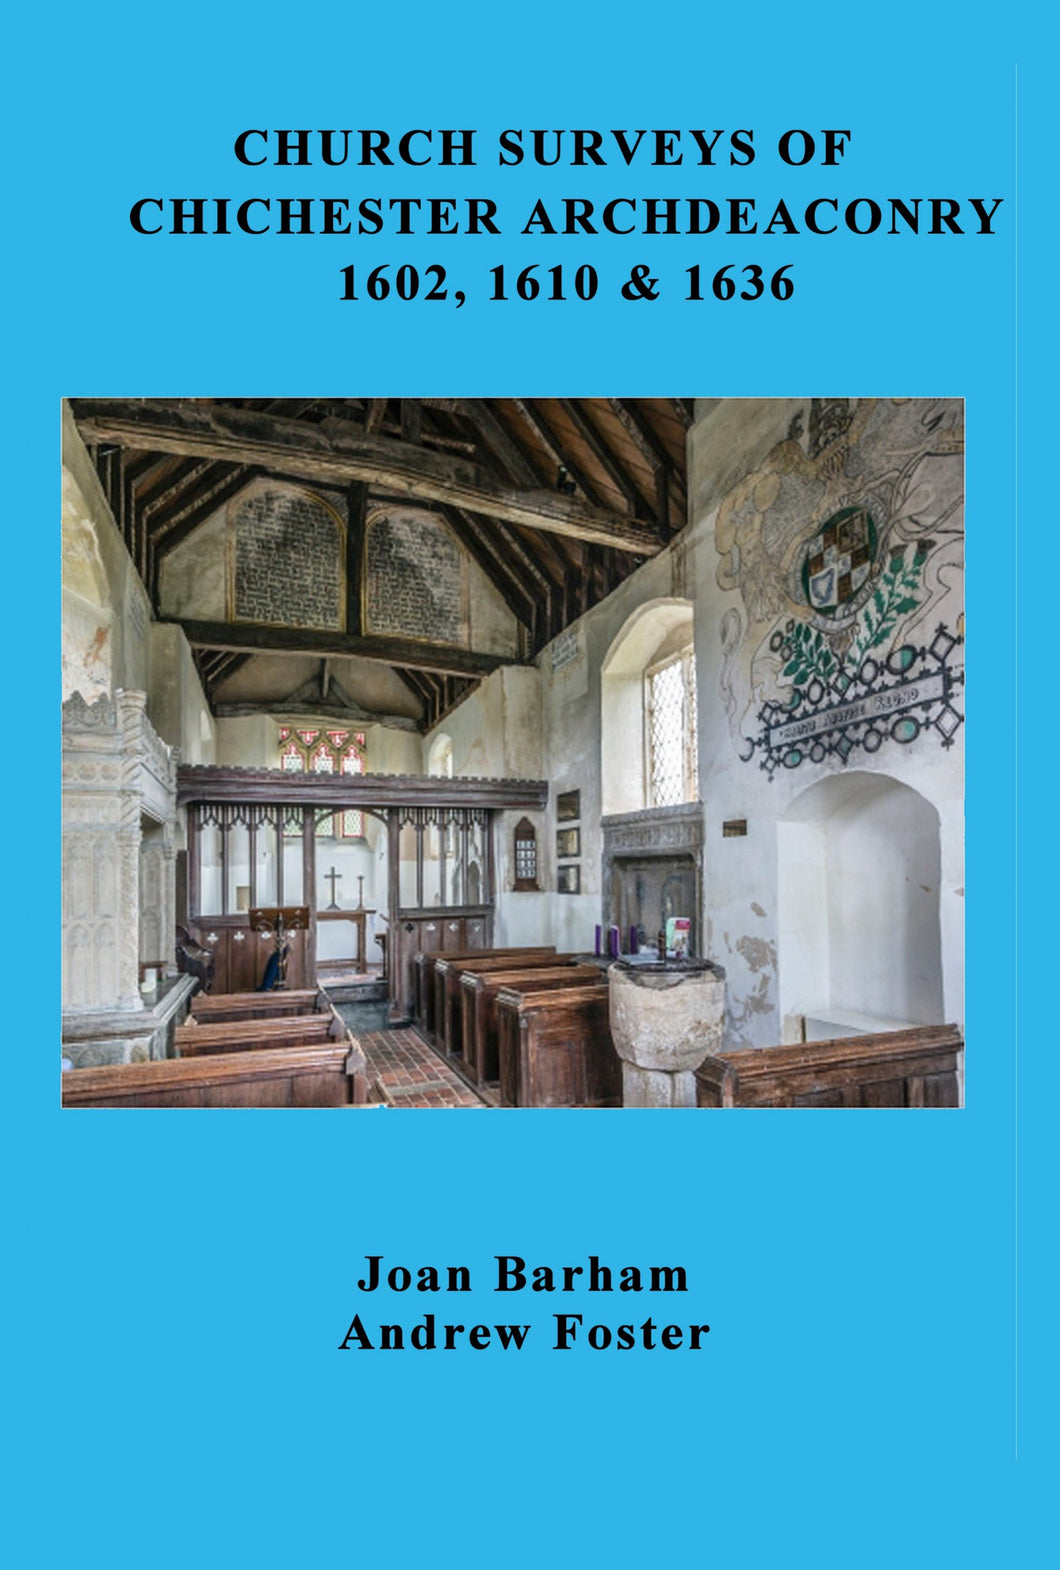 Church Surveys of Chichester Archdeaconry 1602,1610 & 1636